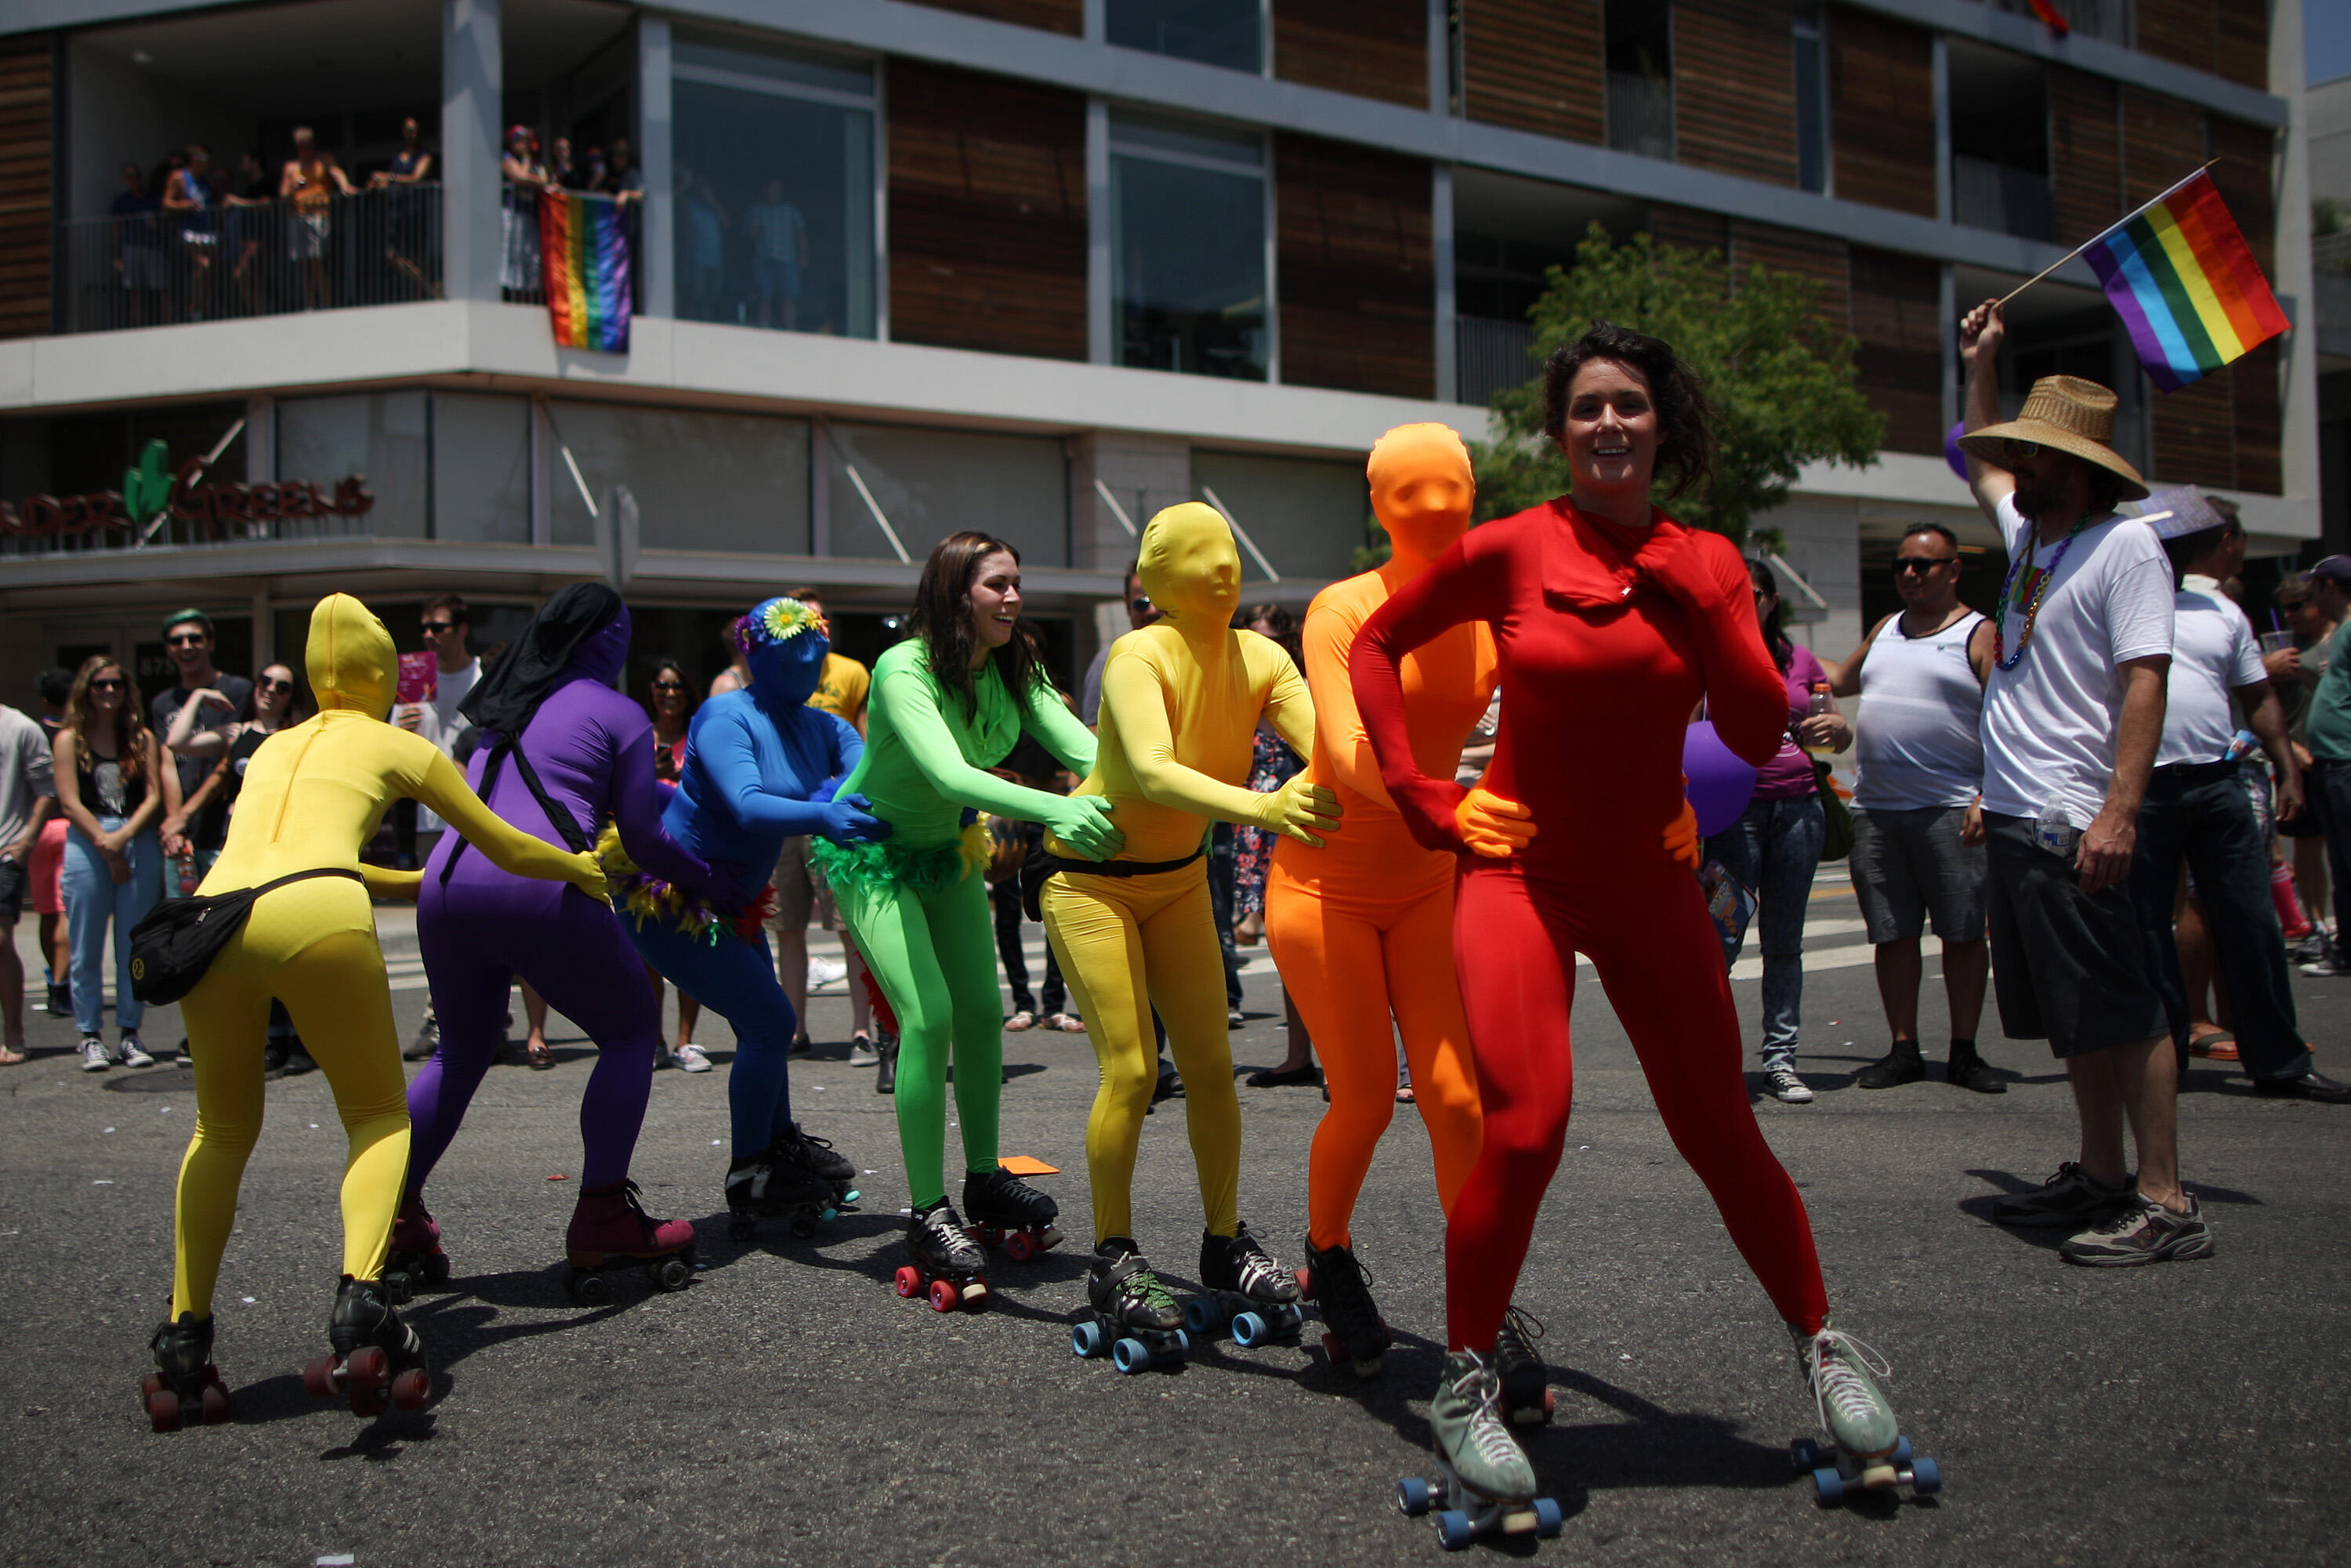 WEST HOLLYWOOD, CA - JUNE 8:  Women roller skate in rainbow-colored body suits in the LA Pride Parade on June 8, 2014 in West Hollywood, California. The LA Pride Parade and weekend events this year are emphasizing transgender rights and issues. The annual